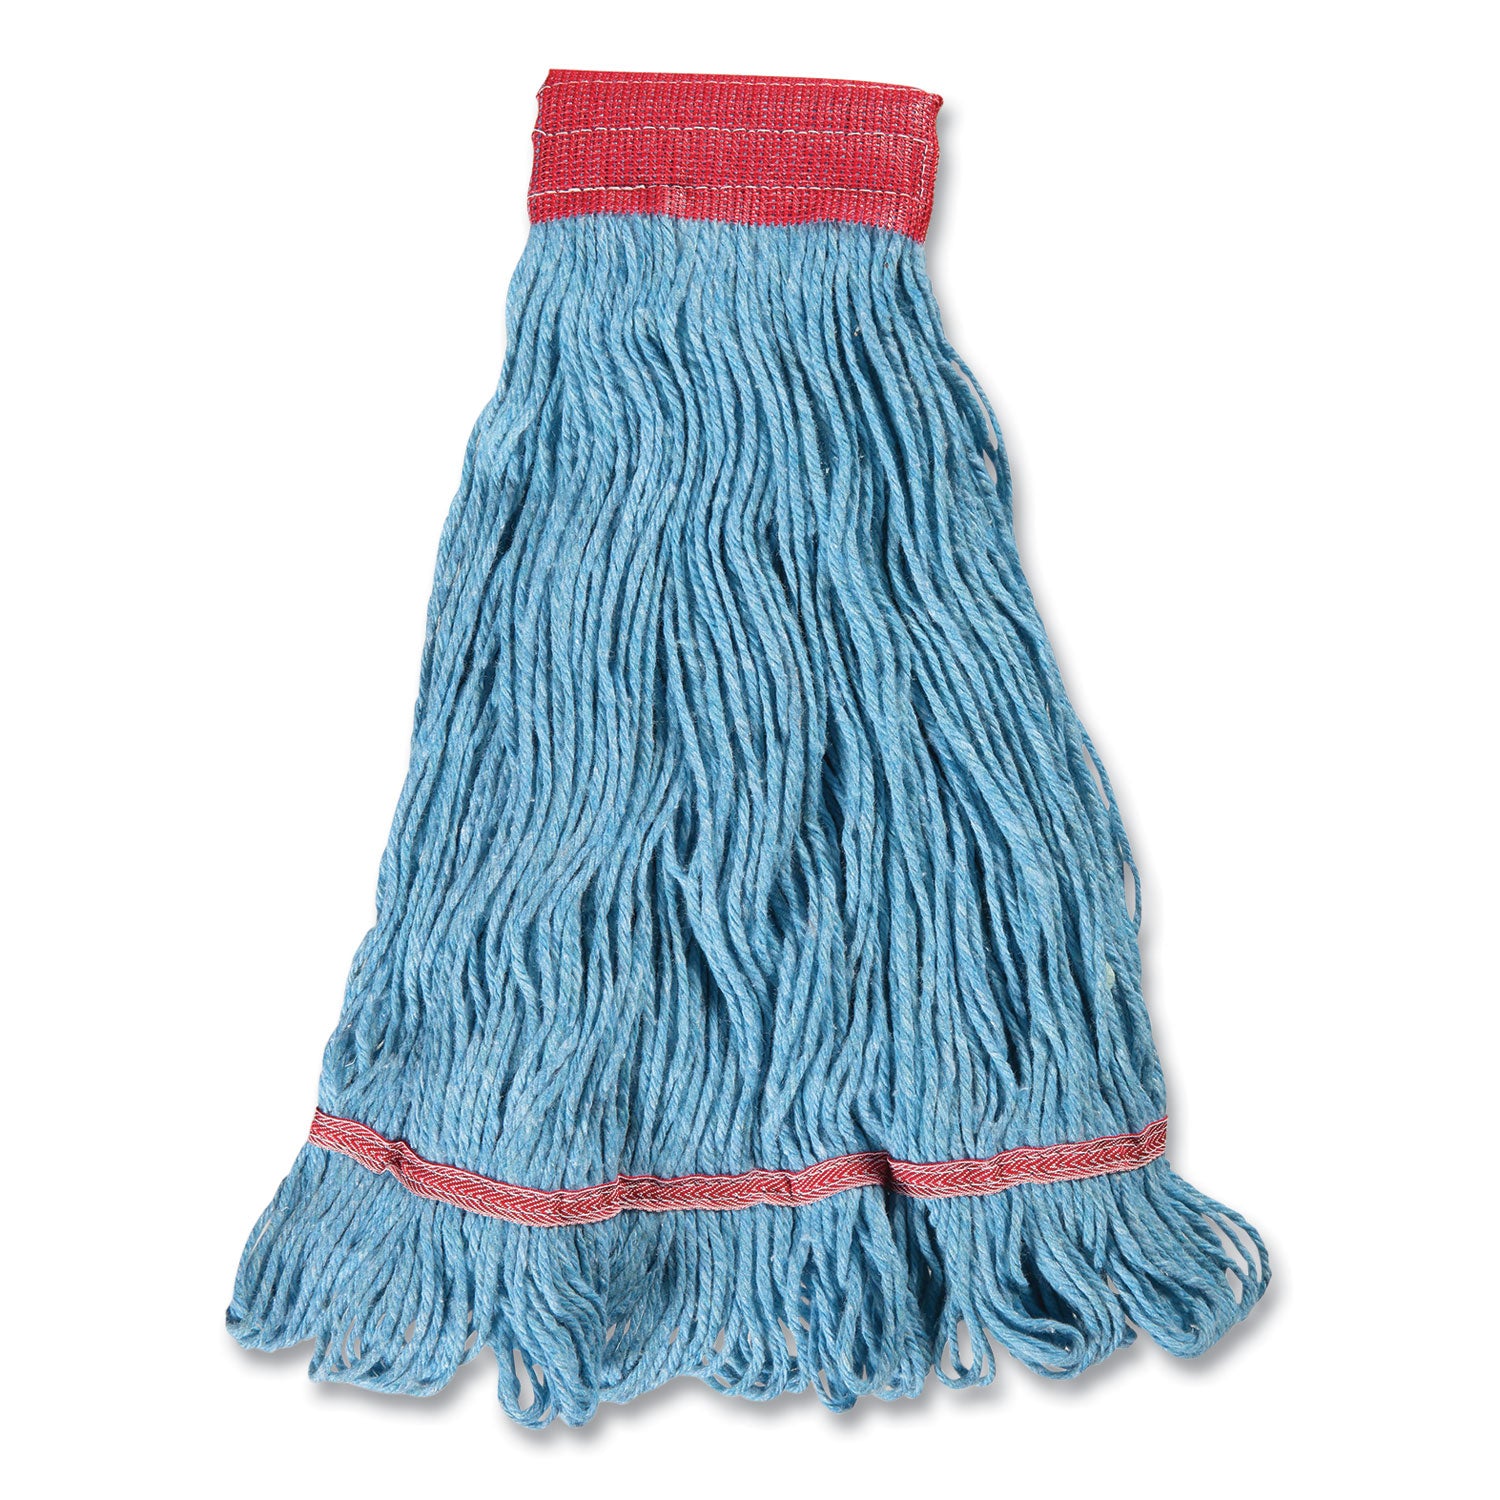 looped-end-wet-mop-head-cotton-rayon-polyester-blend-large-5-headband-blue_cwz24420787 - 2